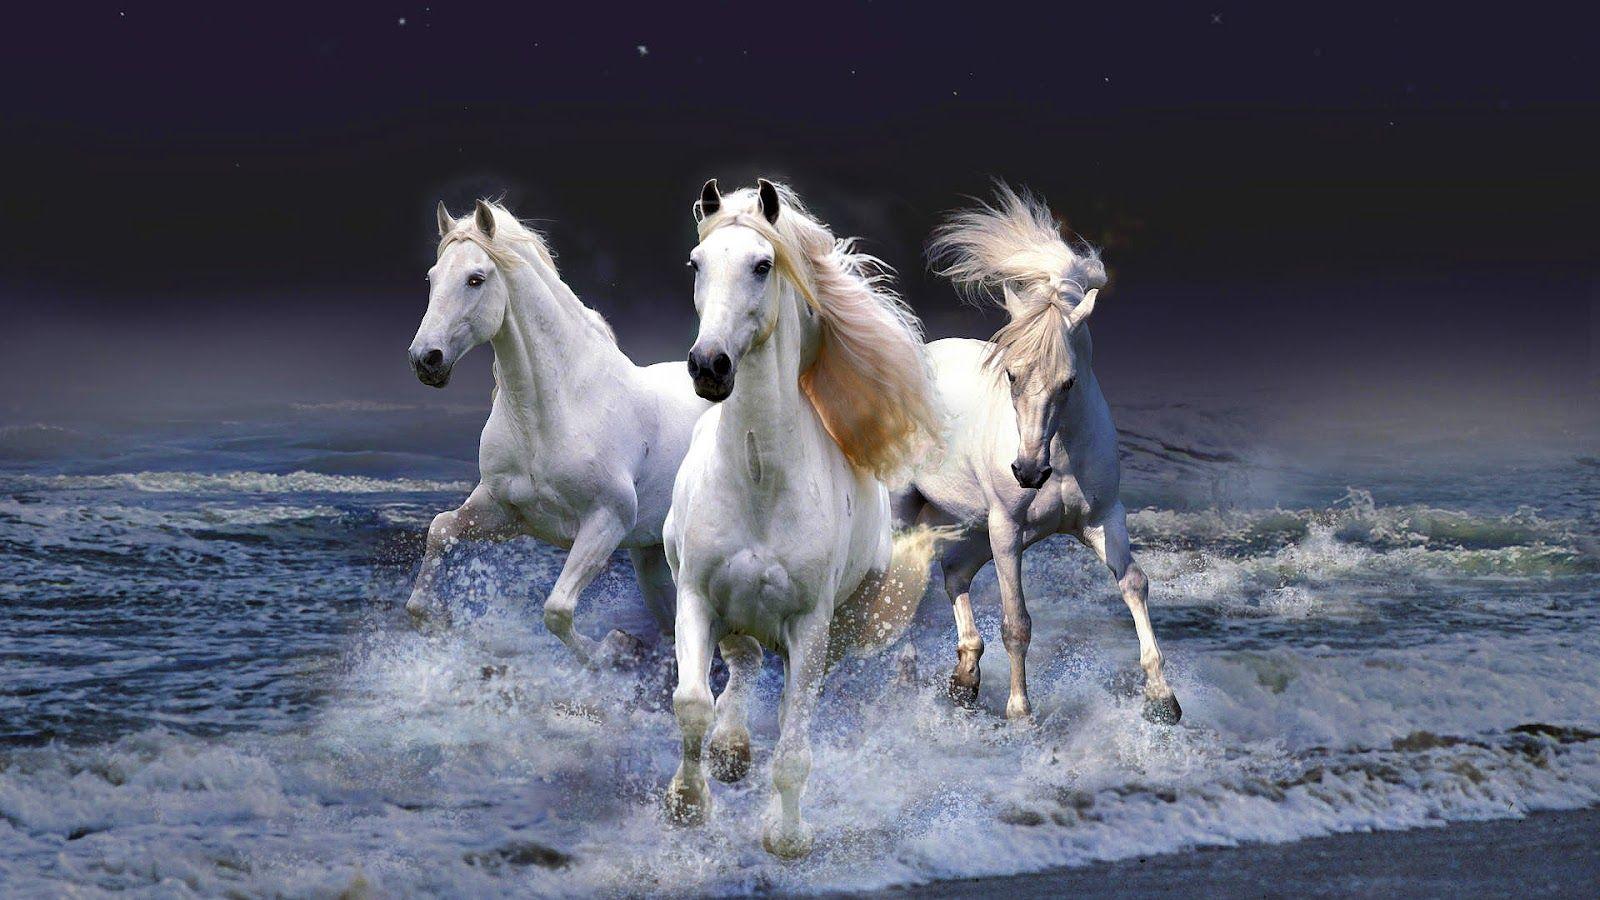 image For Horse Latest HD Wallpaper Free Photo